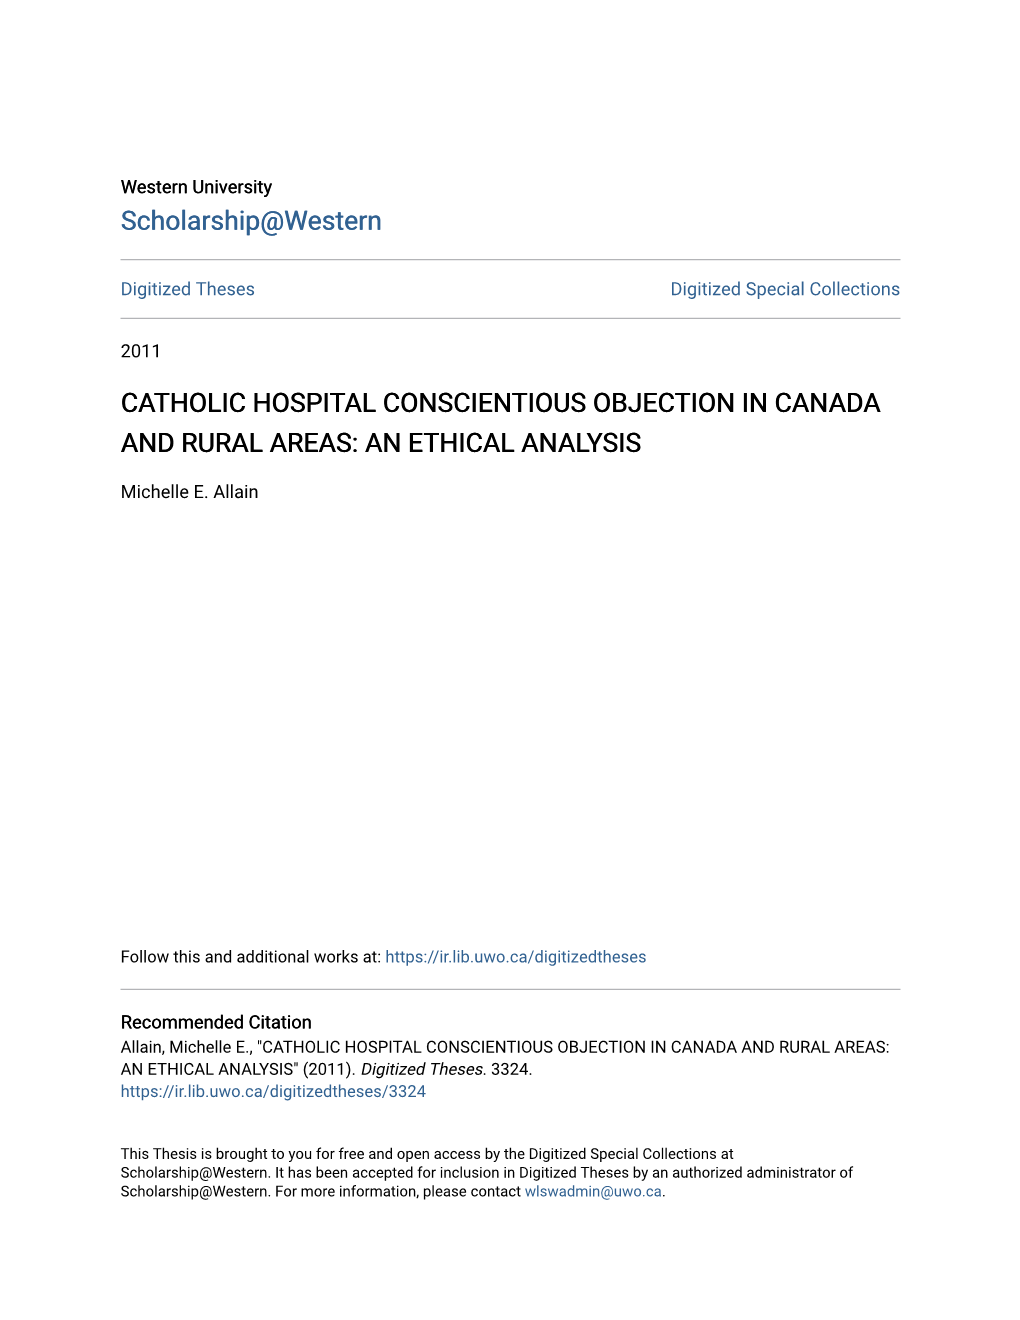 Catholic Hospital Conscientious Objection in Canada and Rural Areas: an Ethical Analysis